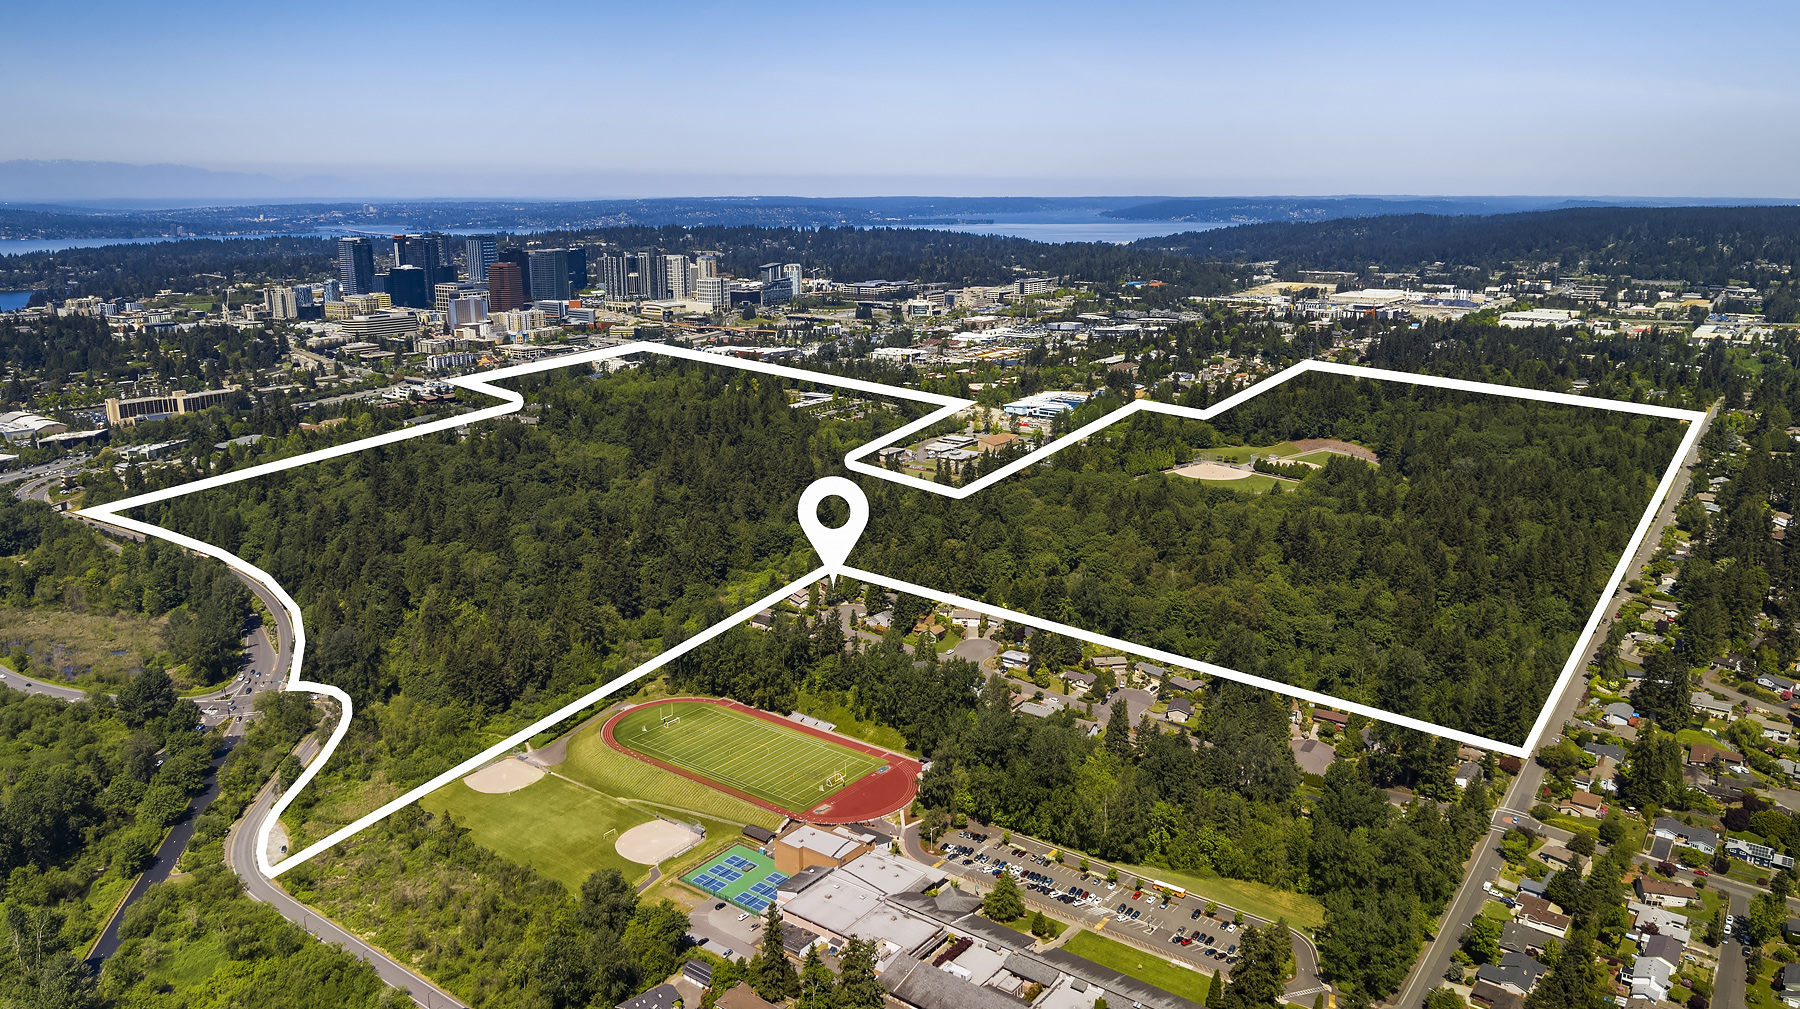 Walk out your back yard onto trails within the 100+ acrea Wilburton Hill Park and Bellevue Botanical Garden. Miles of trails to explore, along with ball fields and playgrounds.